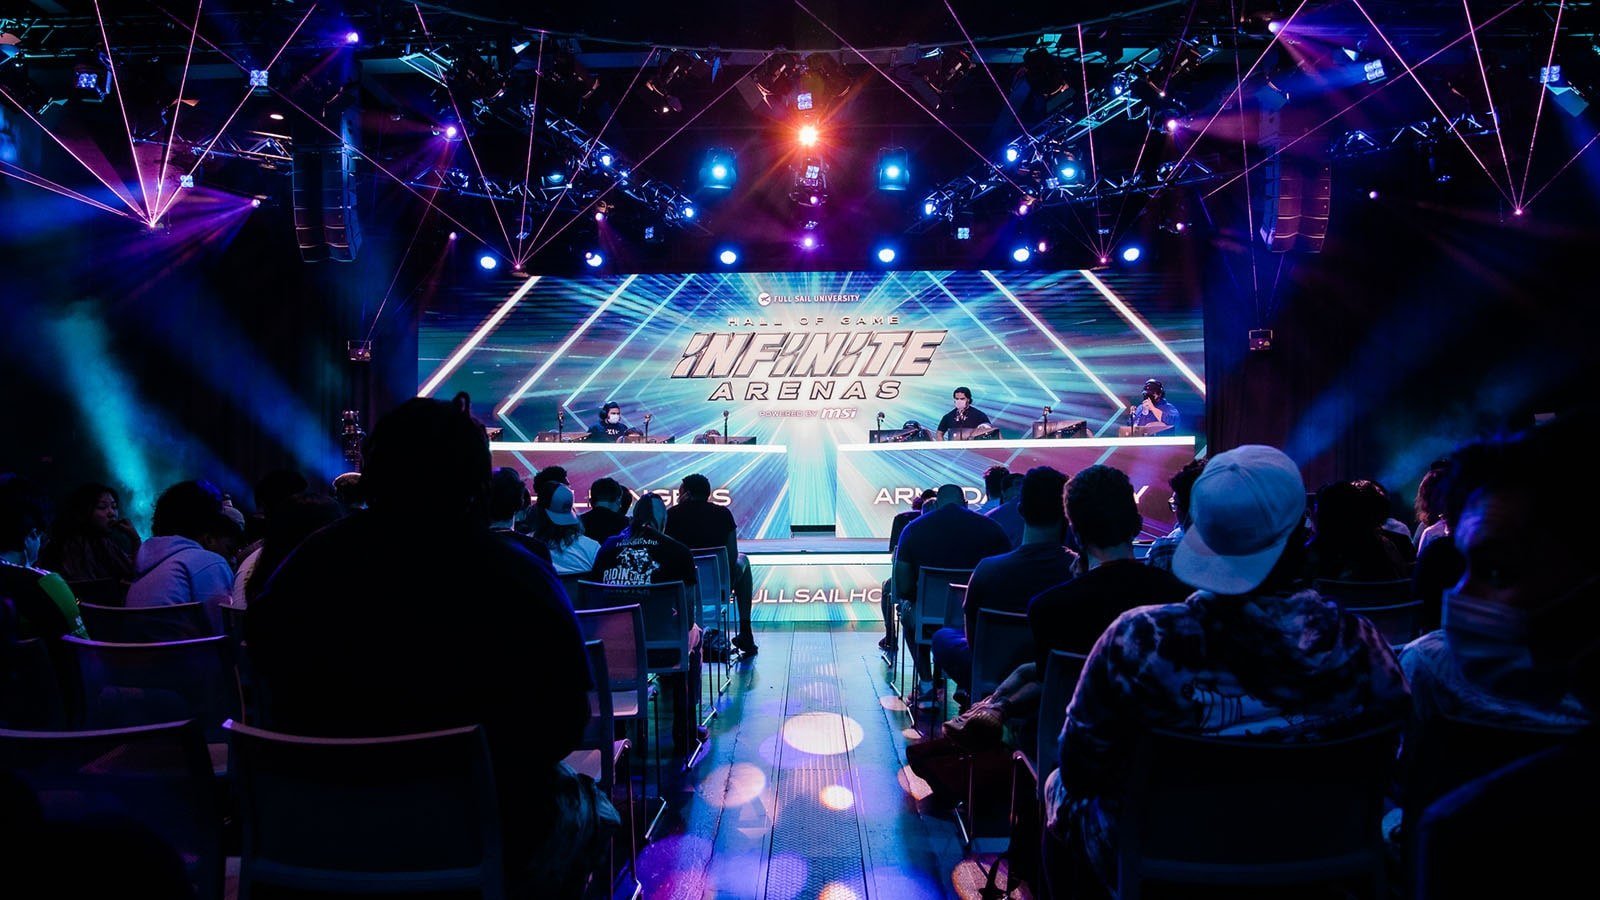 The Full Sail University Orlando Health Fortress’ stage featuring Hall of Game: Infinite Arenas branding in vivid blues, the space is filled with event attendees and illuminated with blue and purple stage lighting.